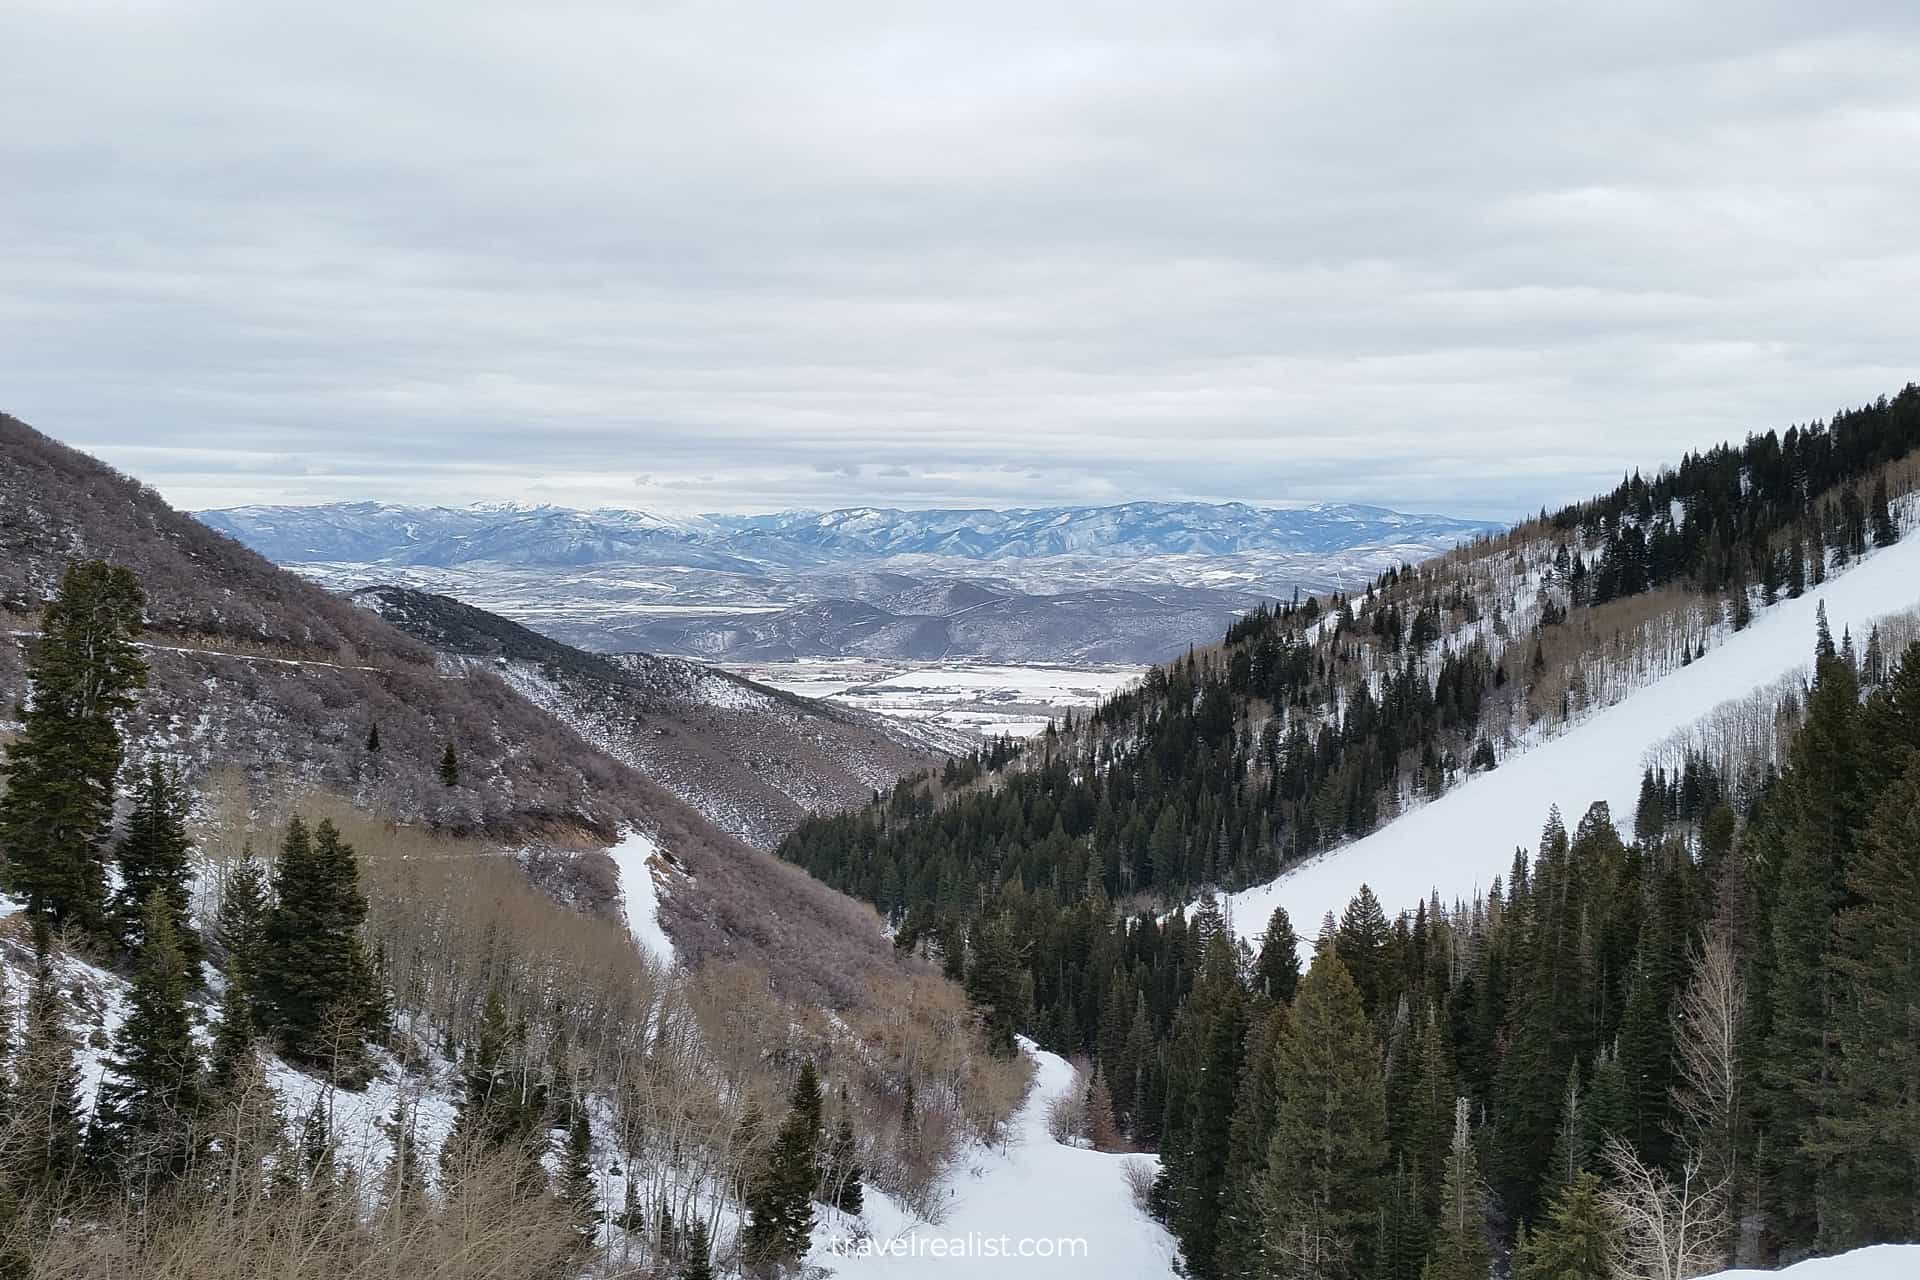 Ski trail with Park City in distance below in Park City, Utah, US